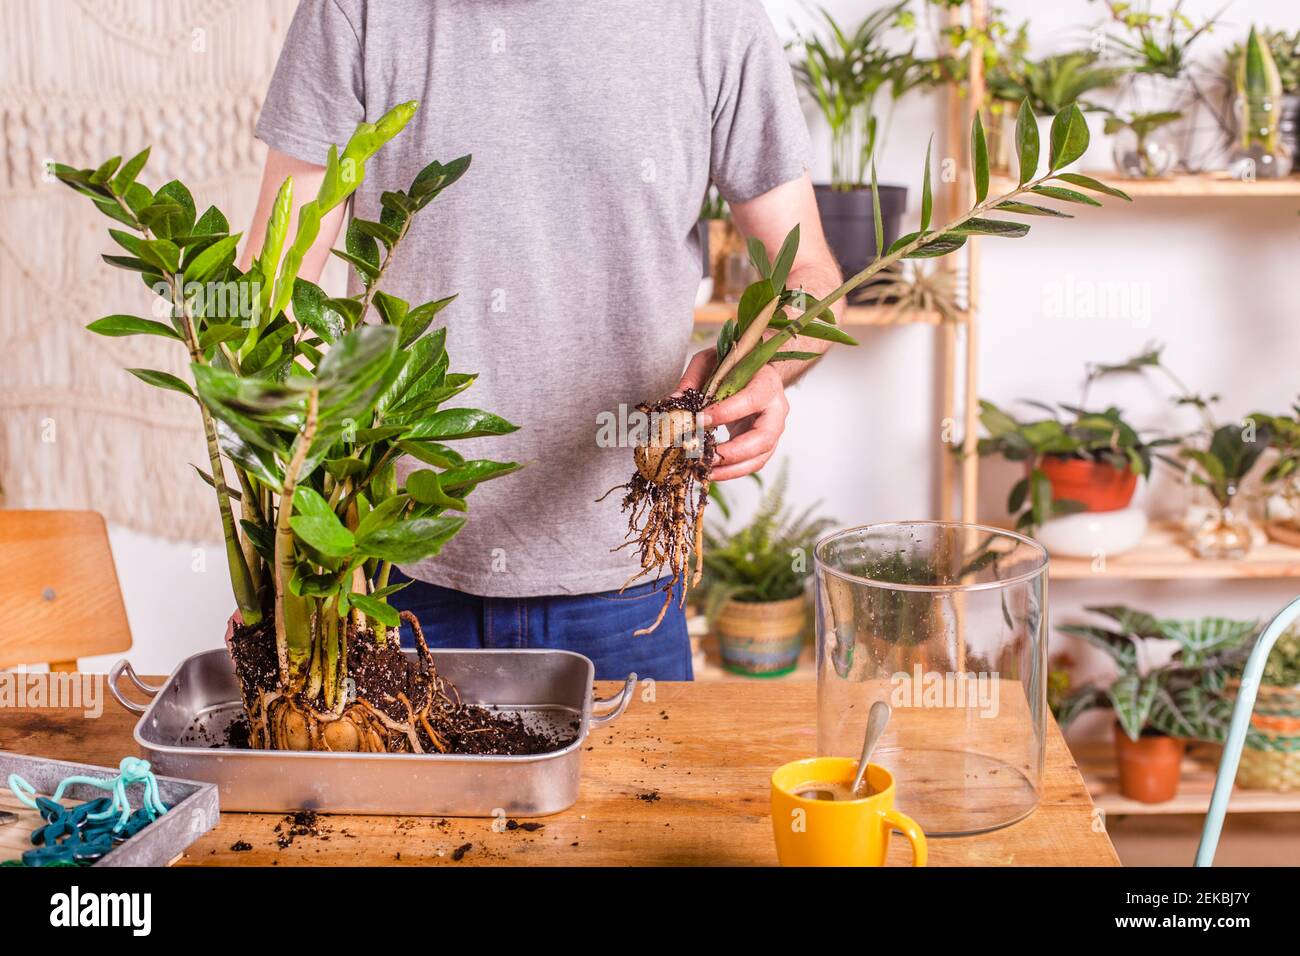 Man dividing roots of Zamioculcas Zamiifolia plant while standing by table at home Stock Photo